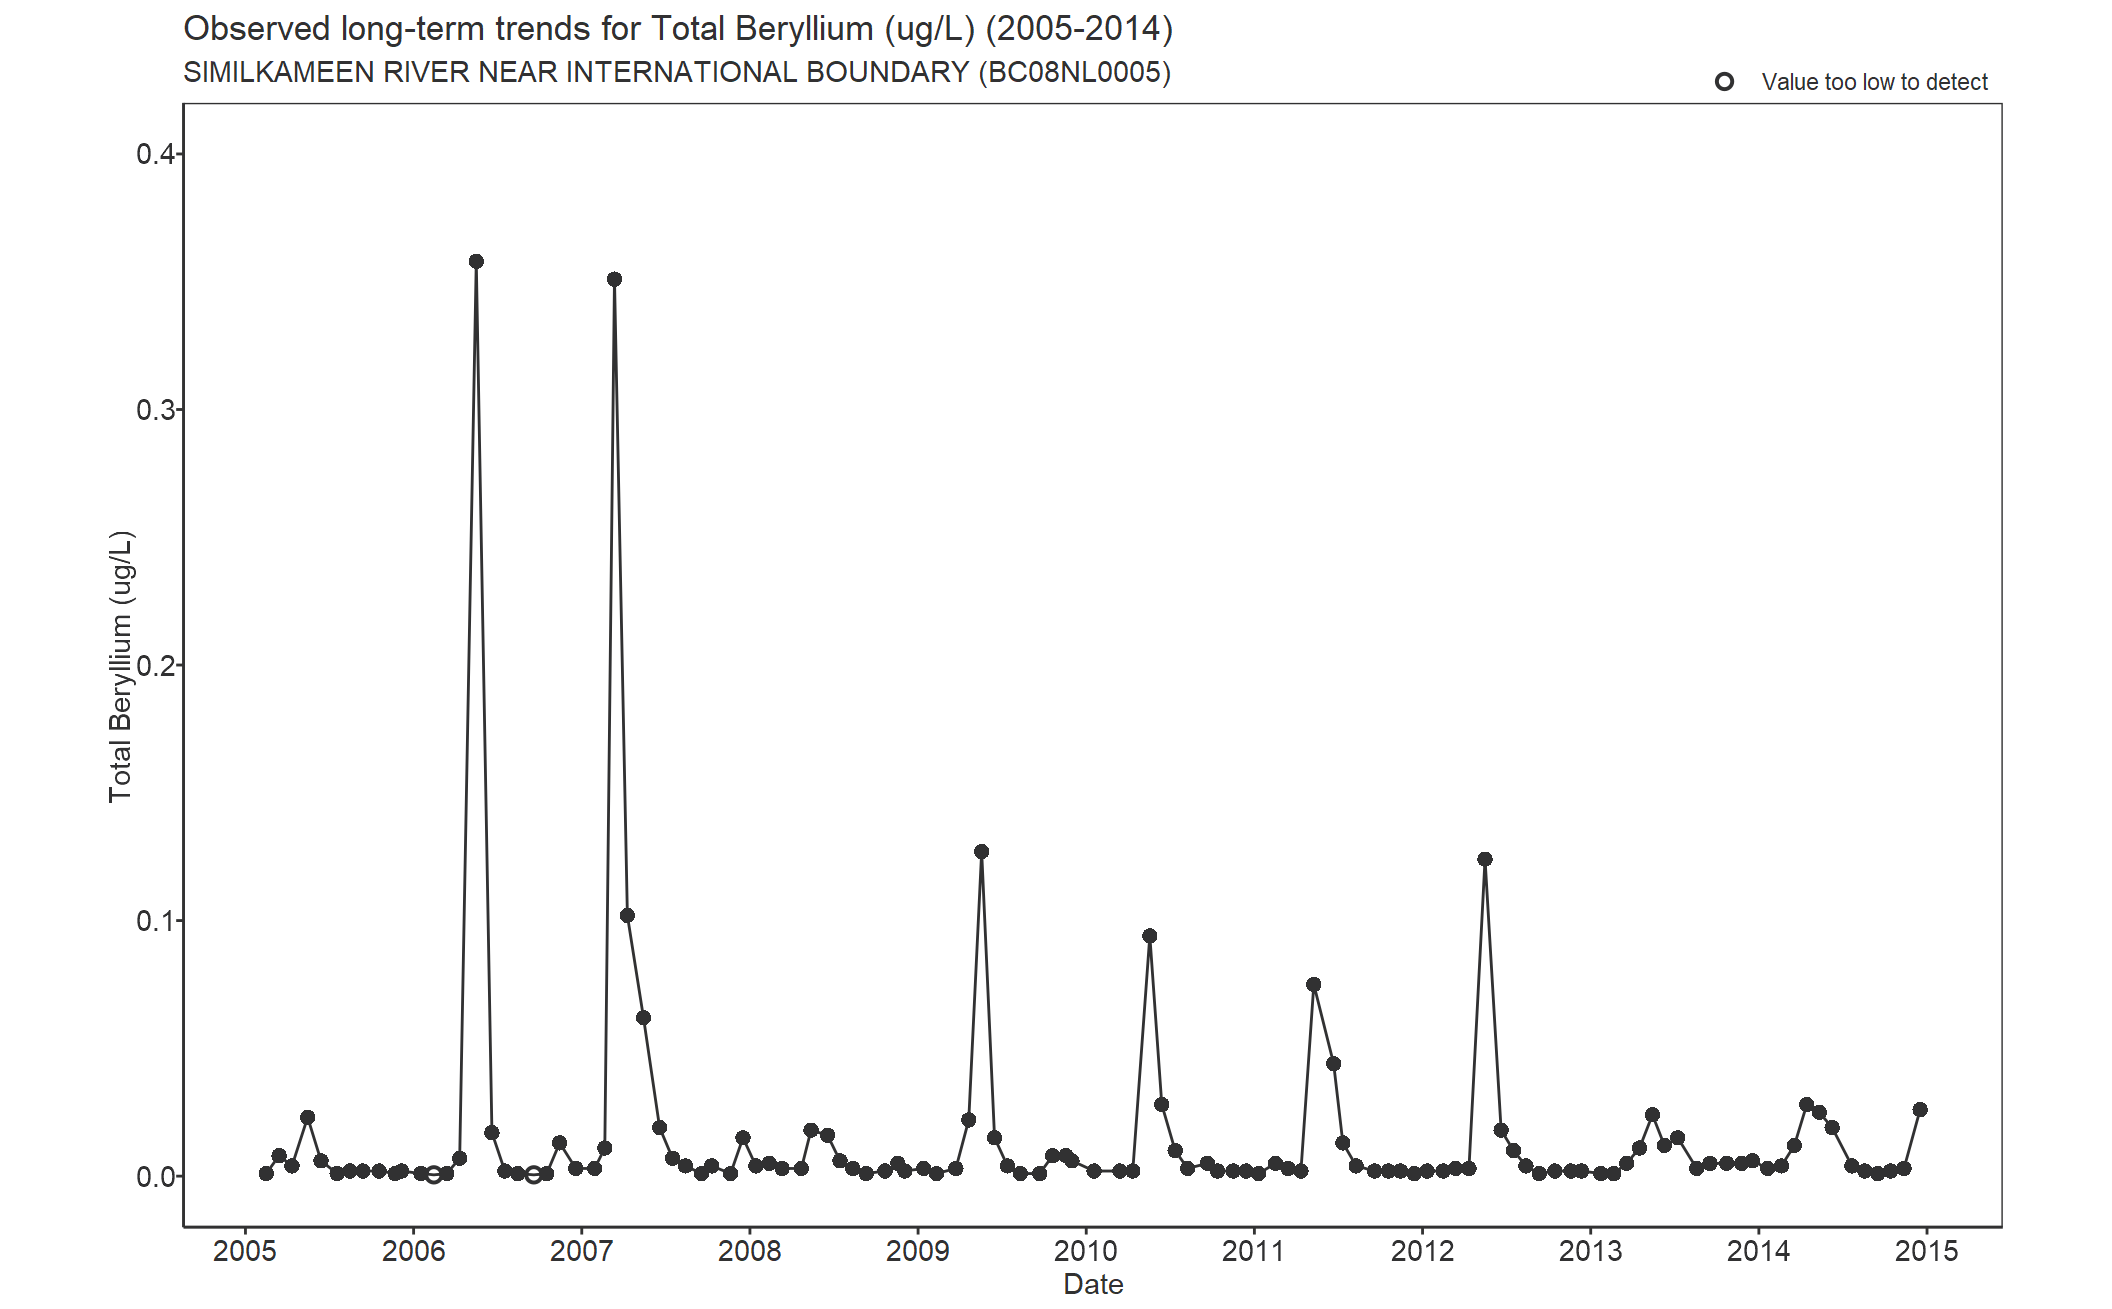 Observed long-term trends for Total Beryllium (2005-2014)